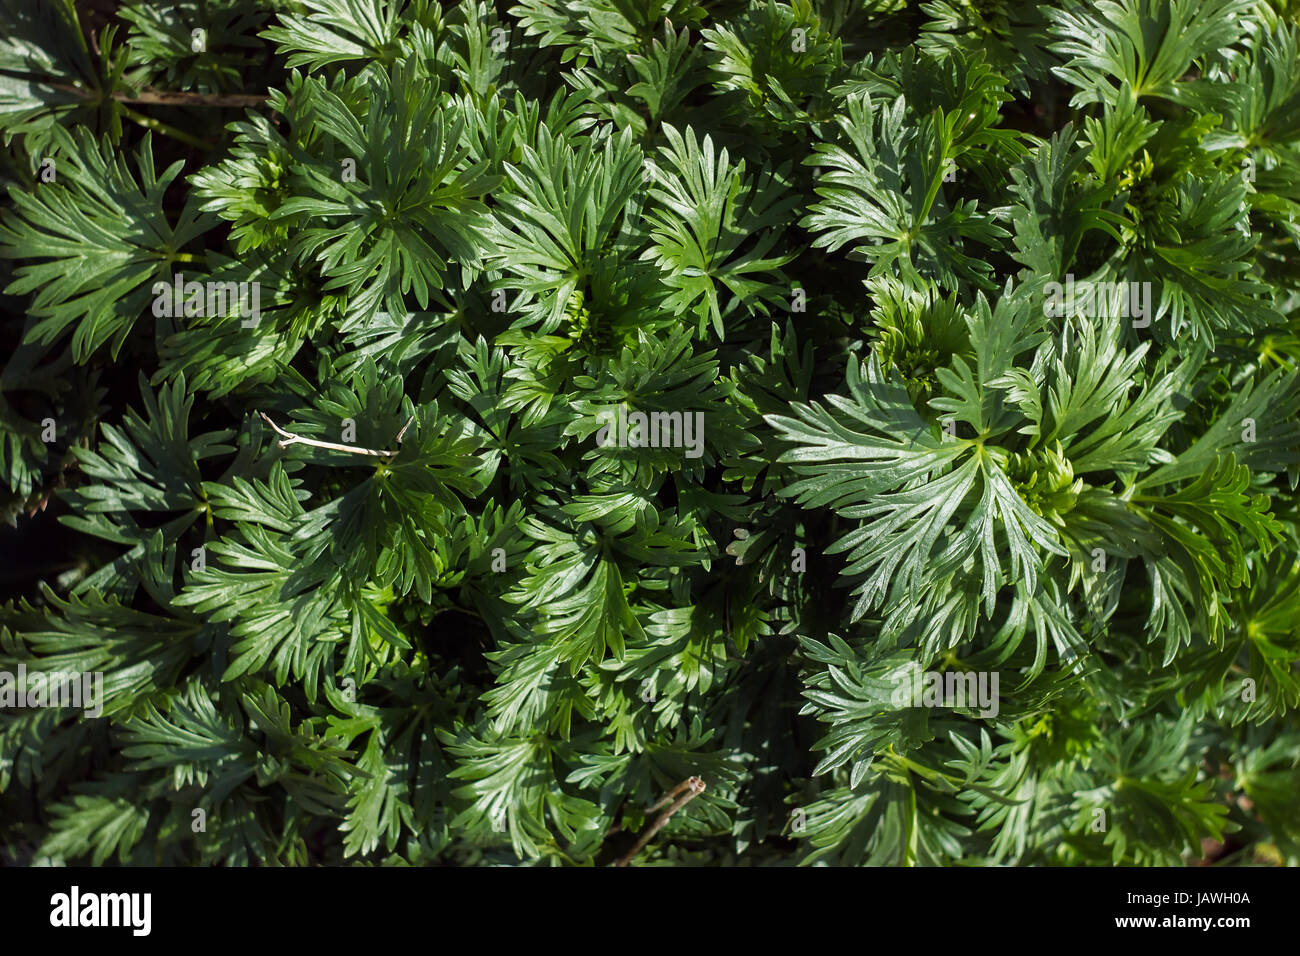 Young monkshood plant leaves, before flowering Stock Photo